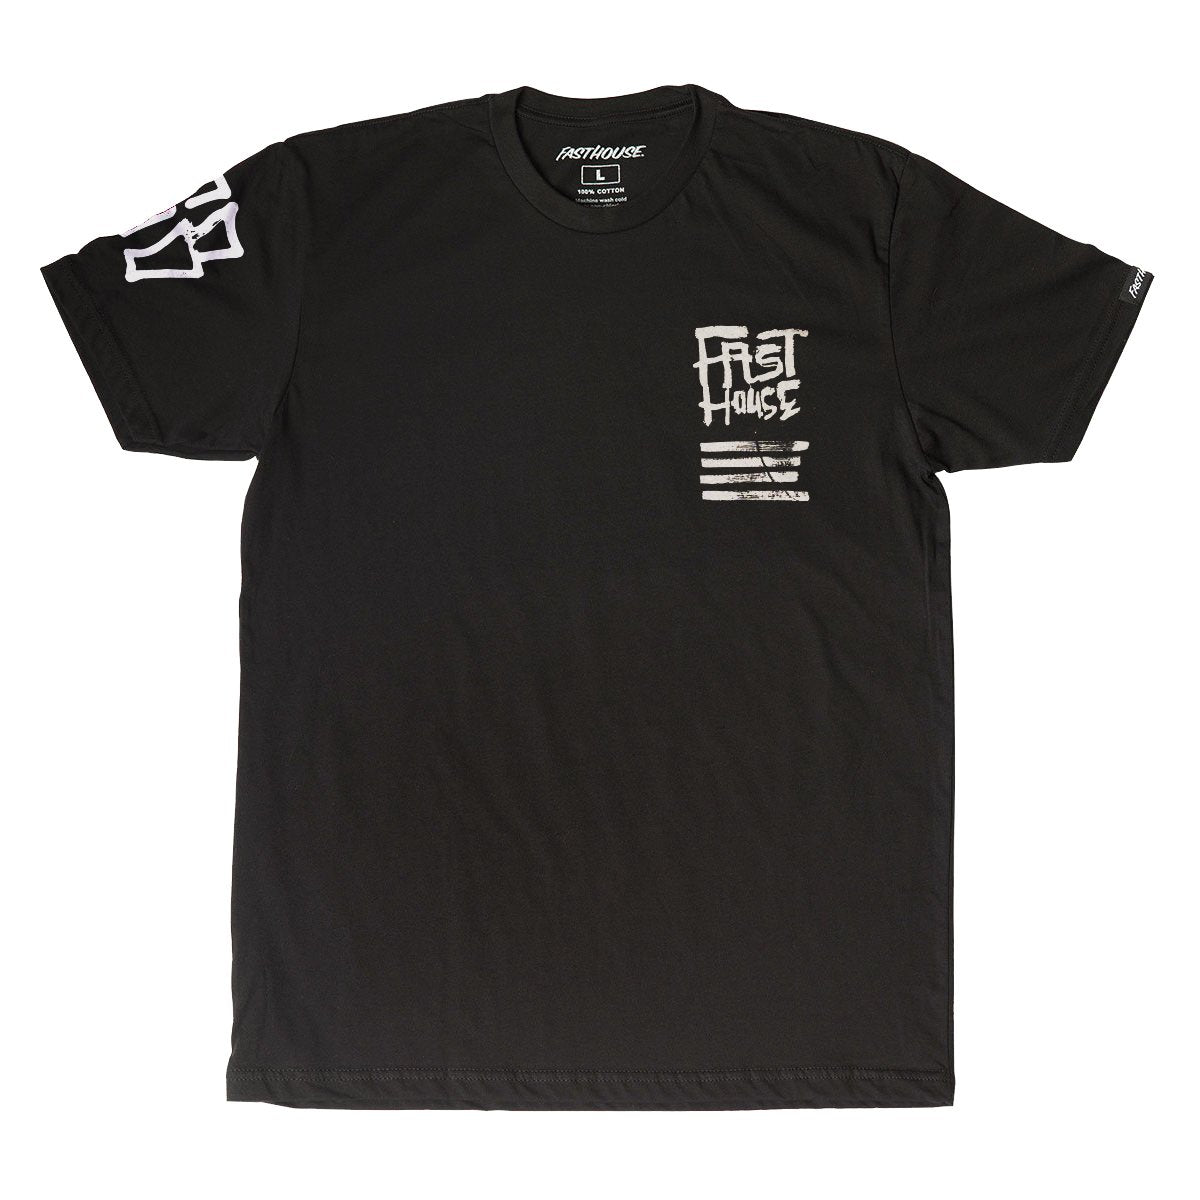 Fasthouse Nelson Tee Black